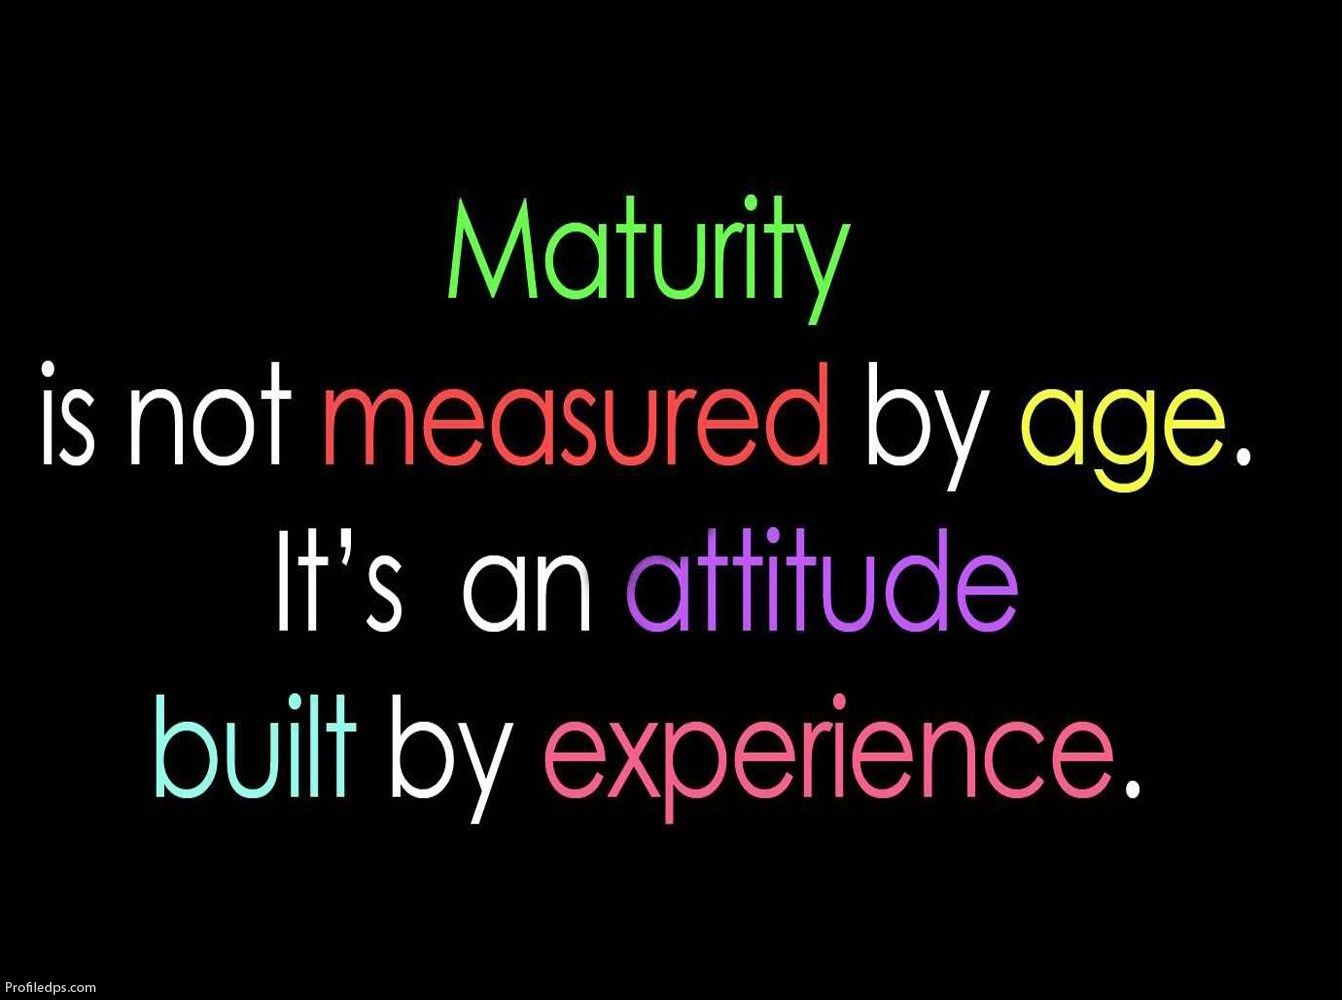 Maturity is not measured by age it